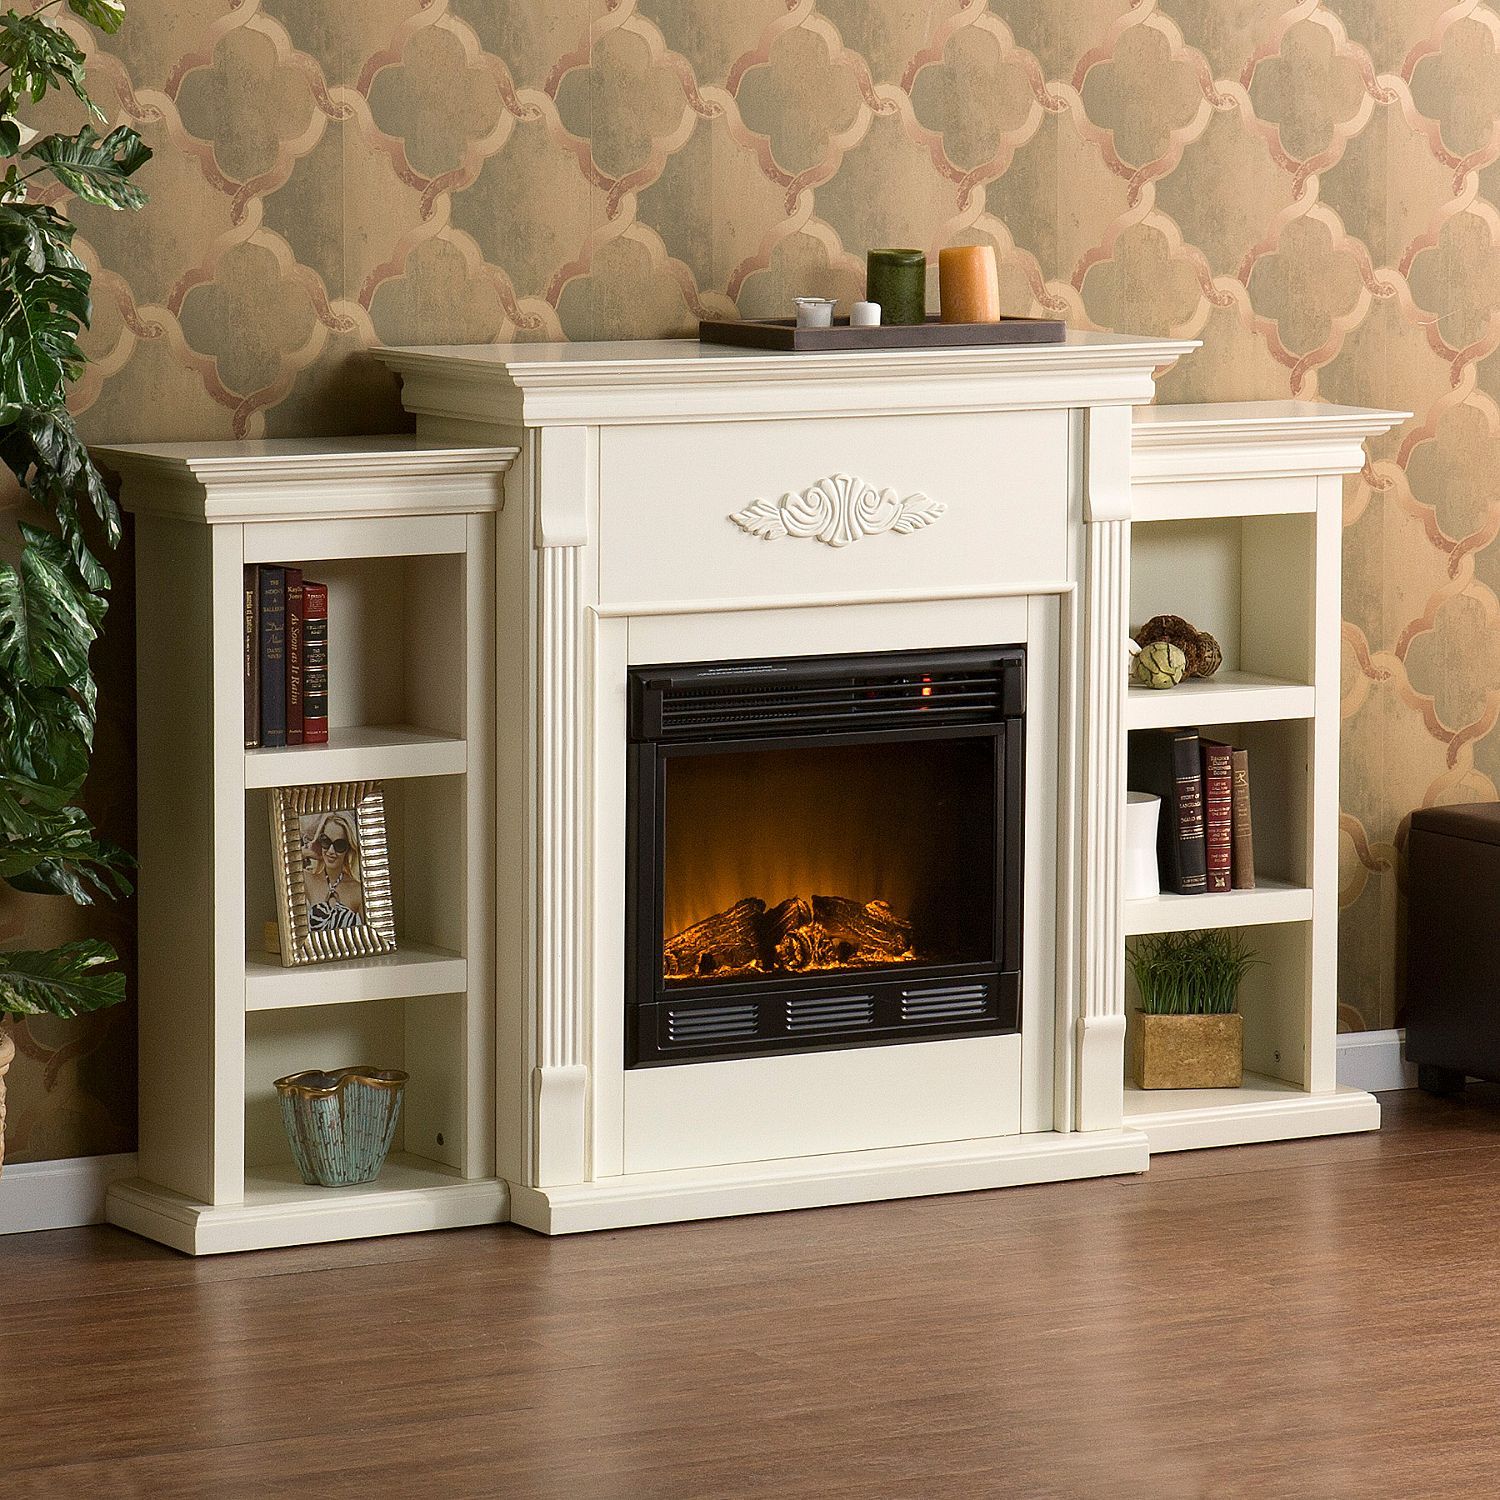 Fake Fireplace Heater Inspirational Emerson Electric Fireplace Ivory Sam S Club